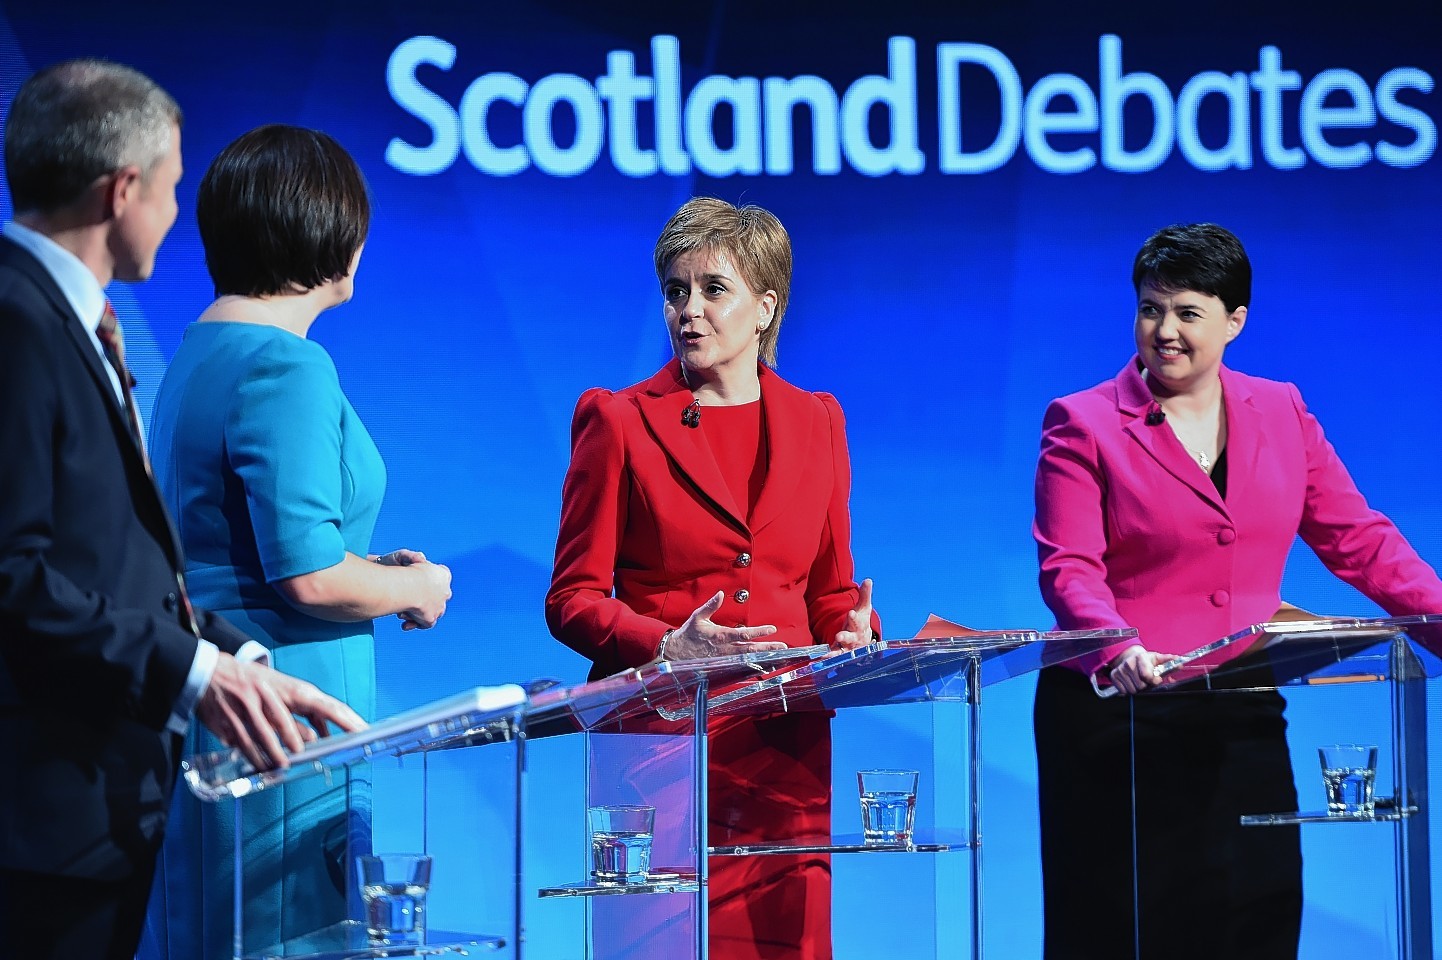 STV Hold Televised Leader's Debate Ahead Of The Holyrood Elections